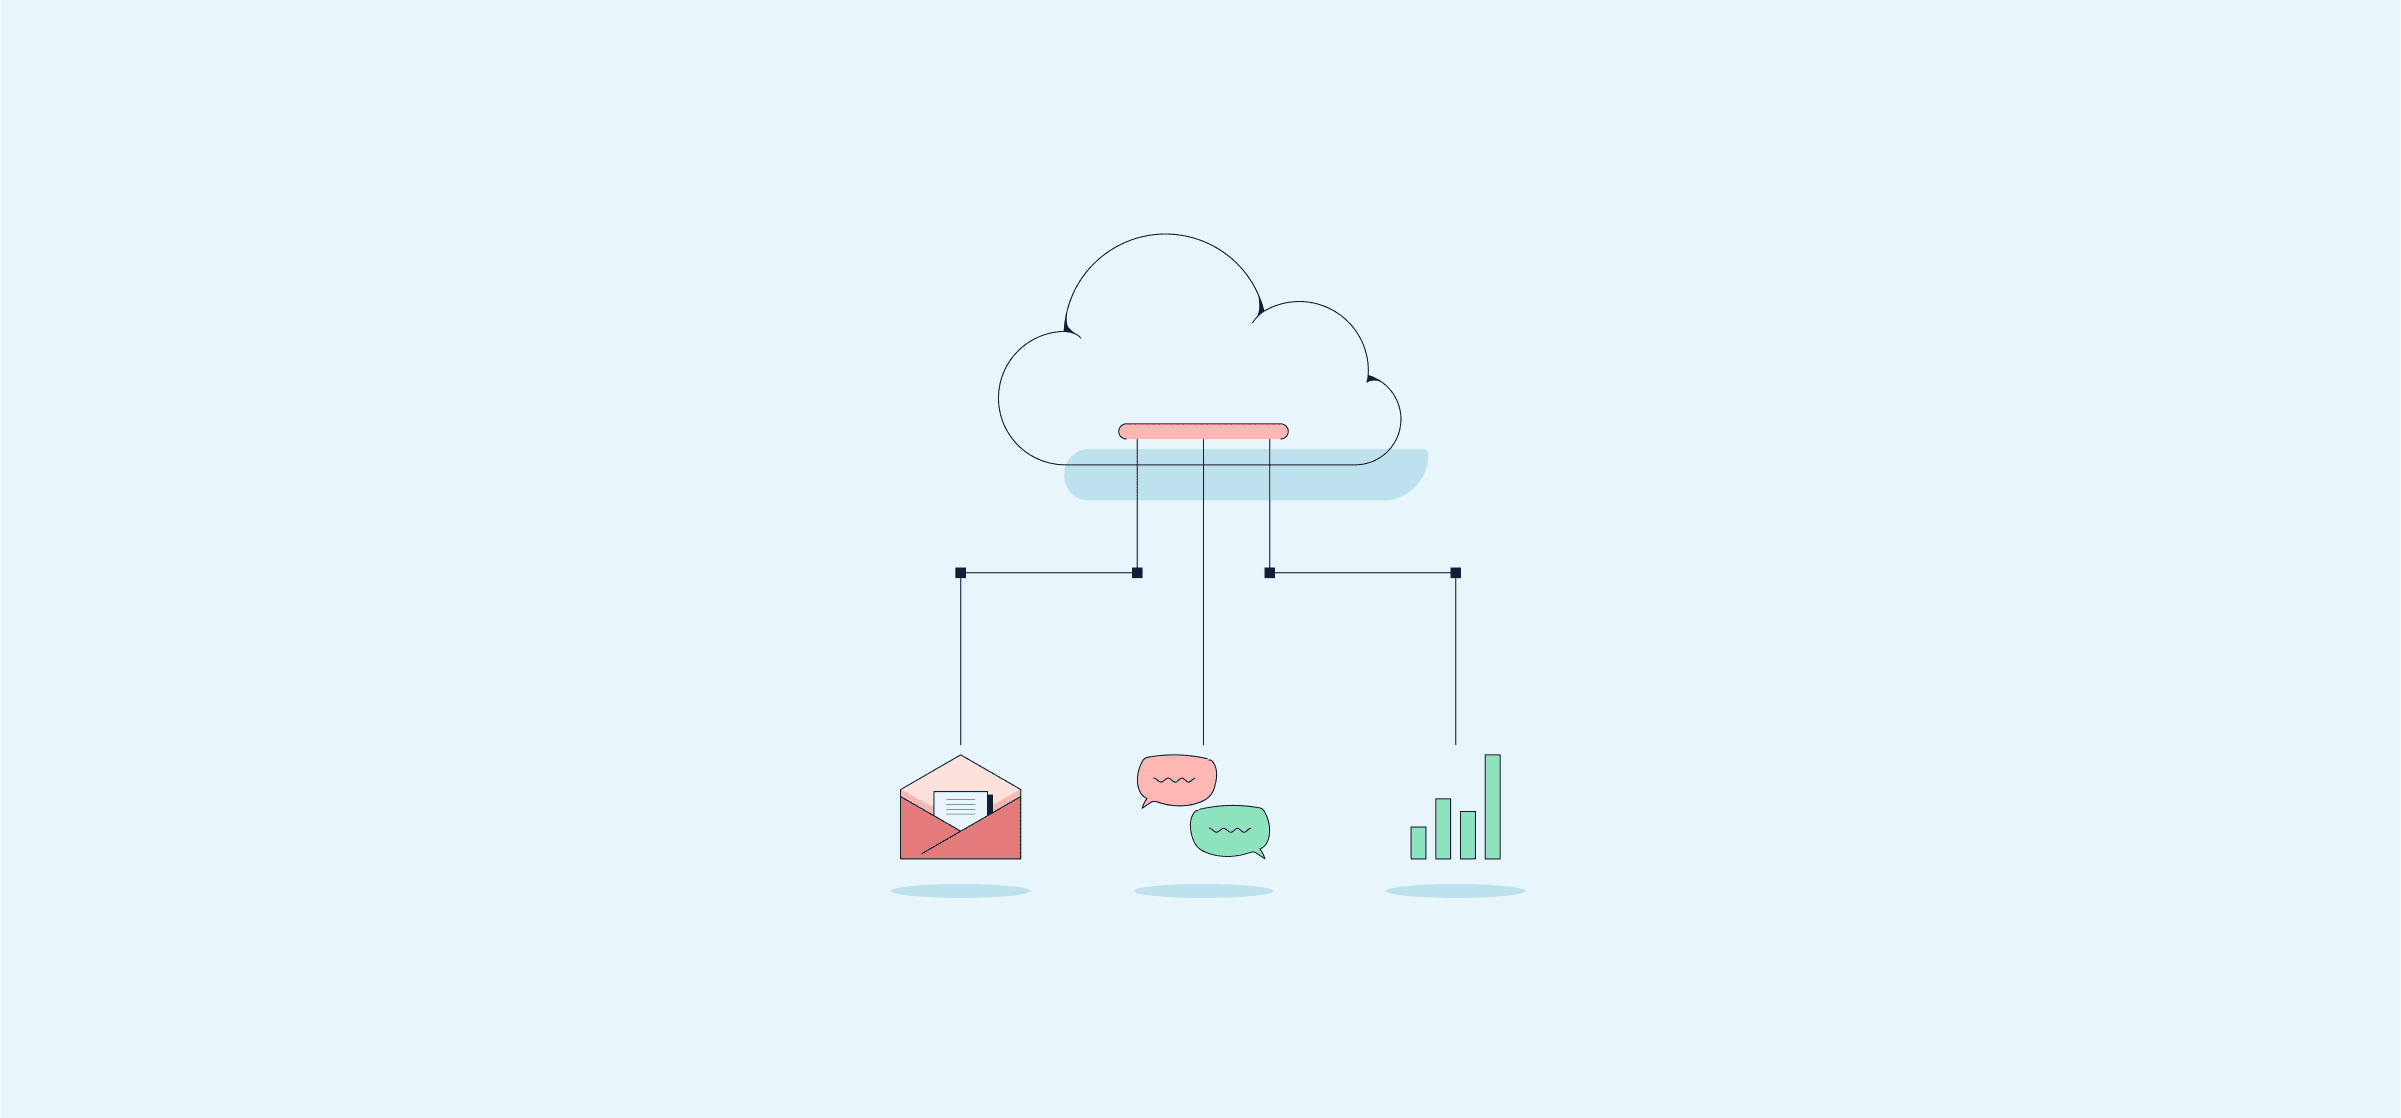 An illustration of a cloud with lines leading to an envelope, a text message bubble, and a bar graph, representing data integration tools.